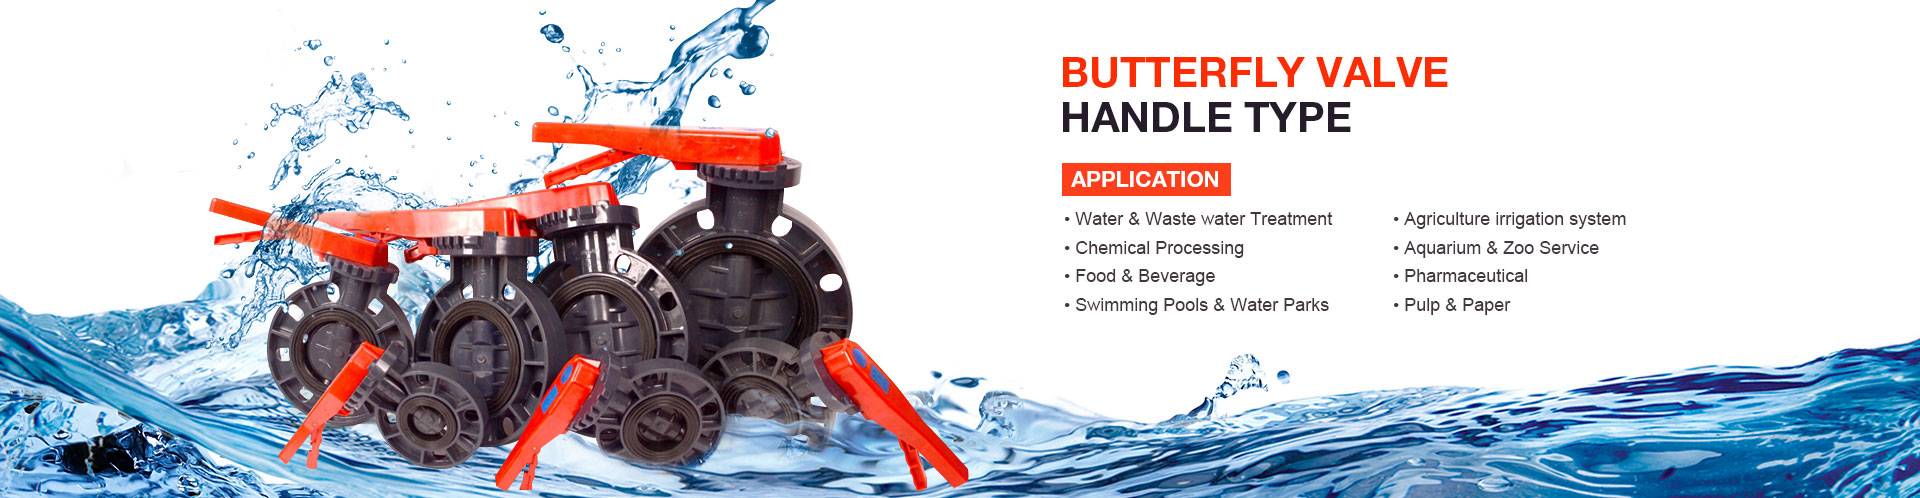 Butterfly-Valve-Handle-type